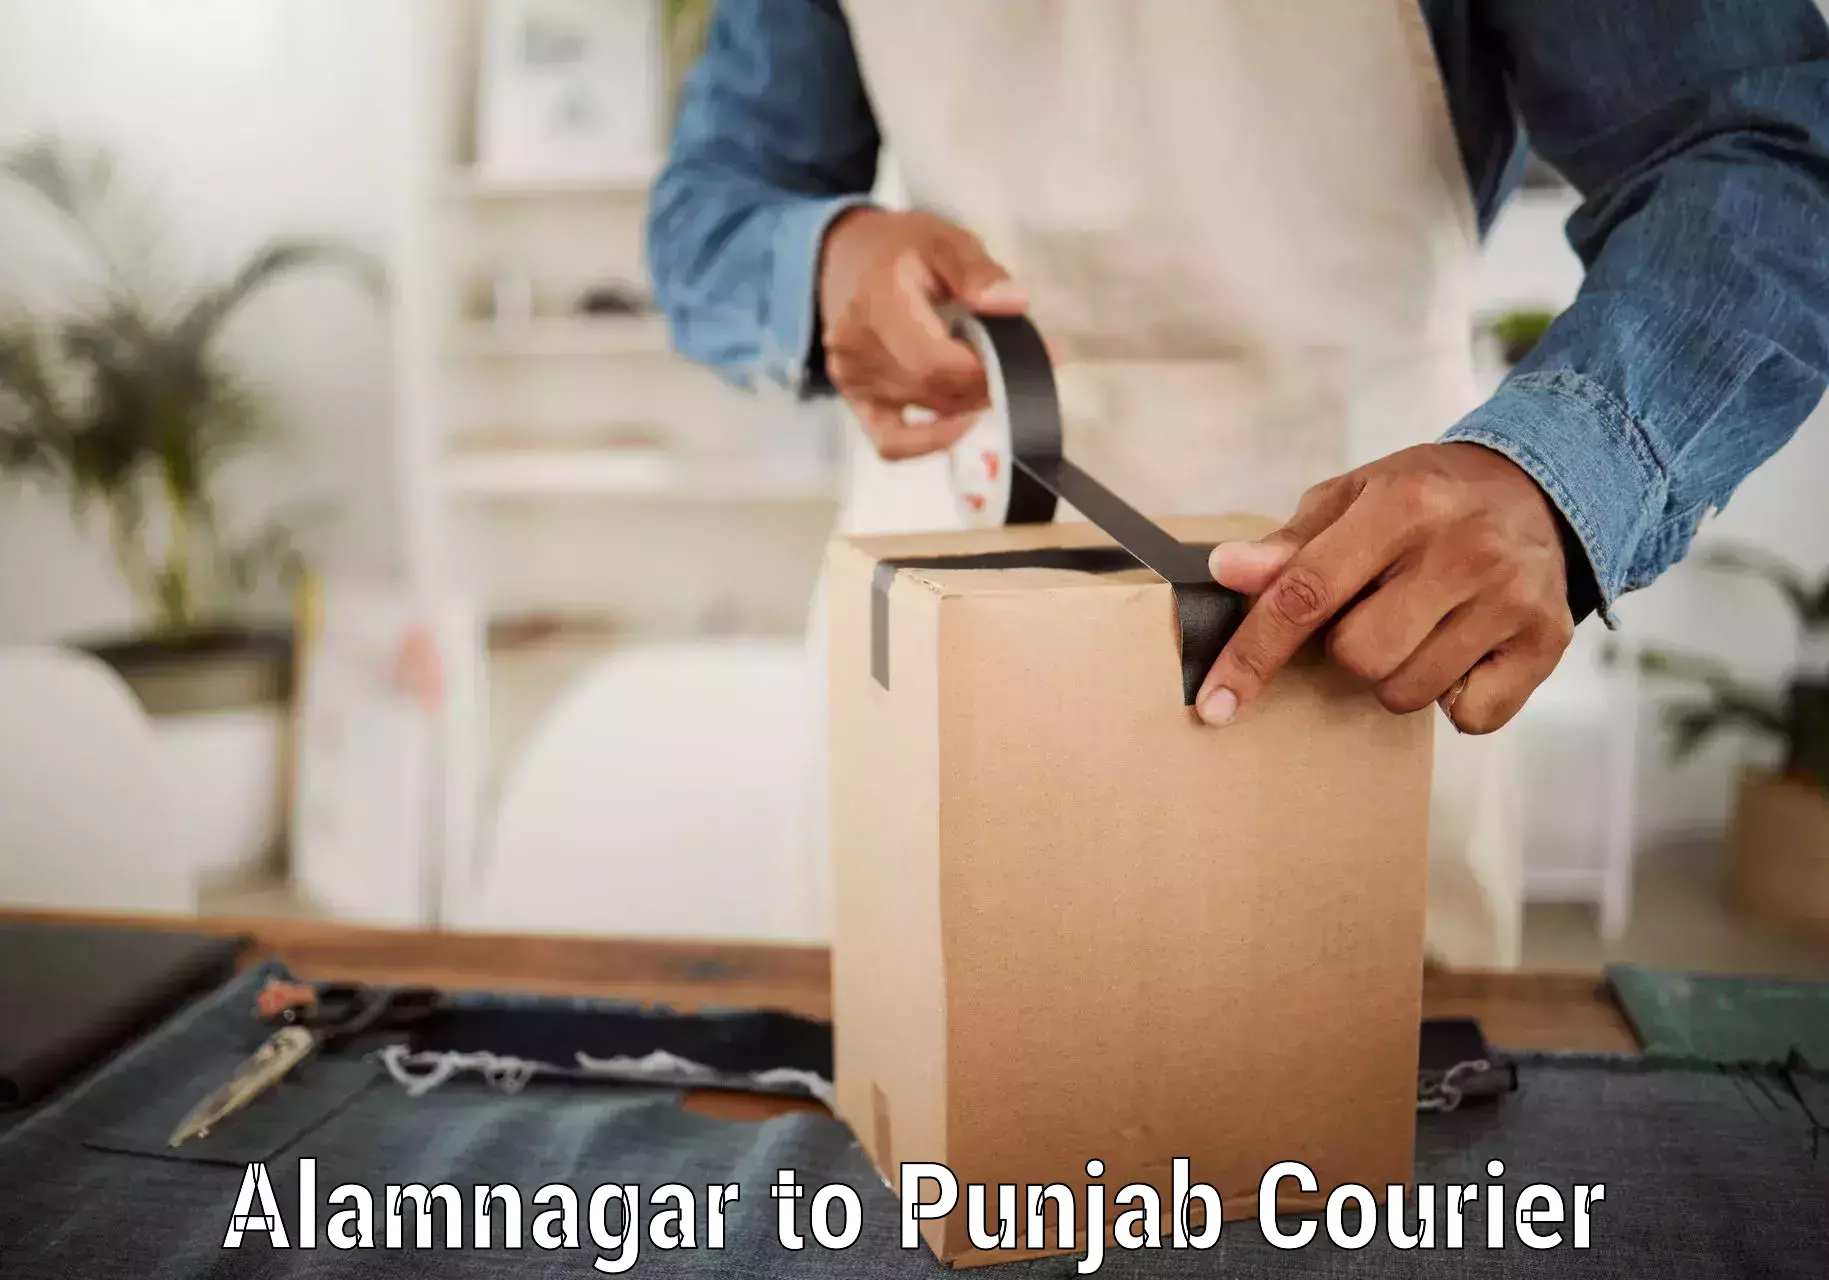 User-friendly delivery service Alamnagar to Mohali